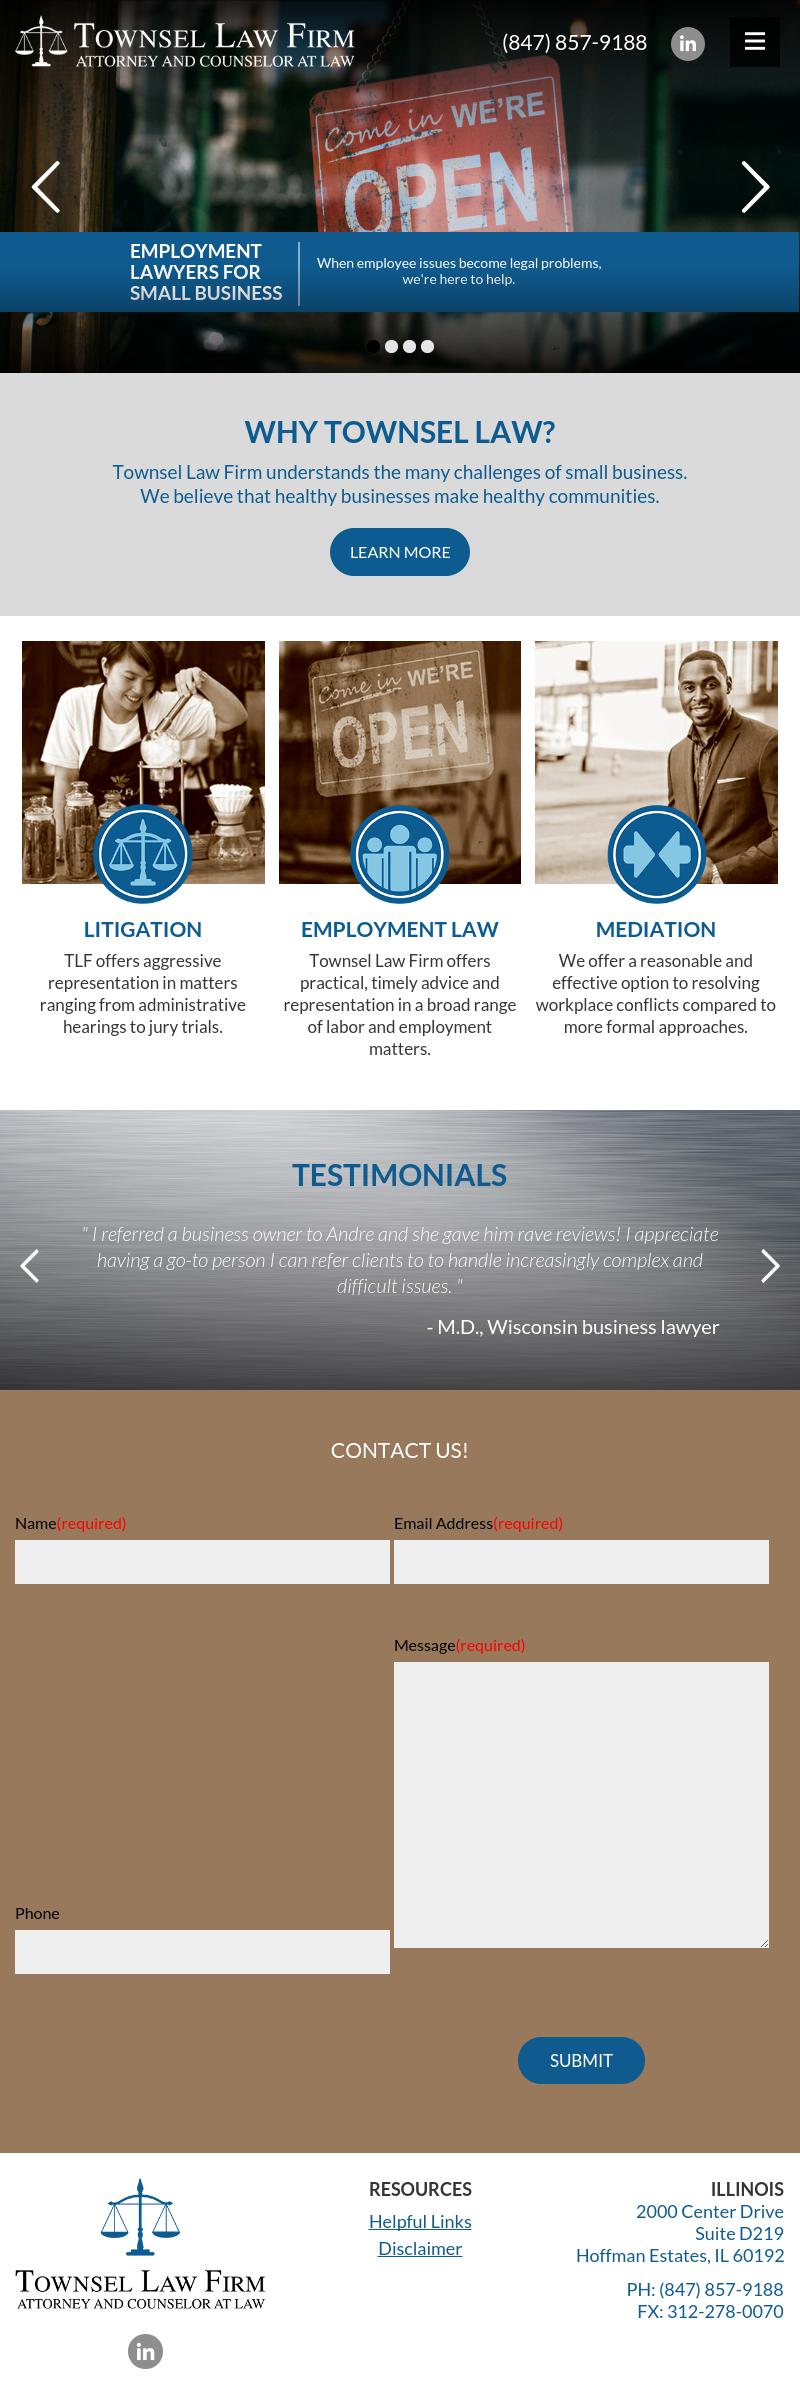 Townsel Law Firm - Schaumburg IL Lawyers